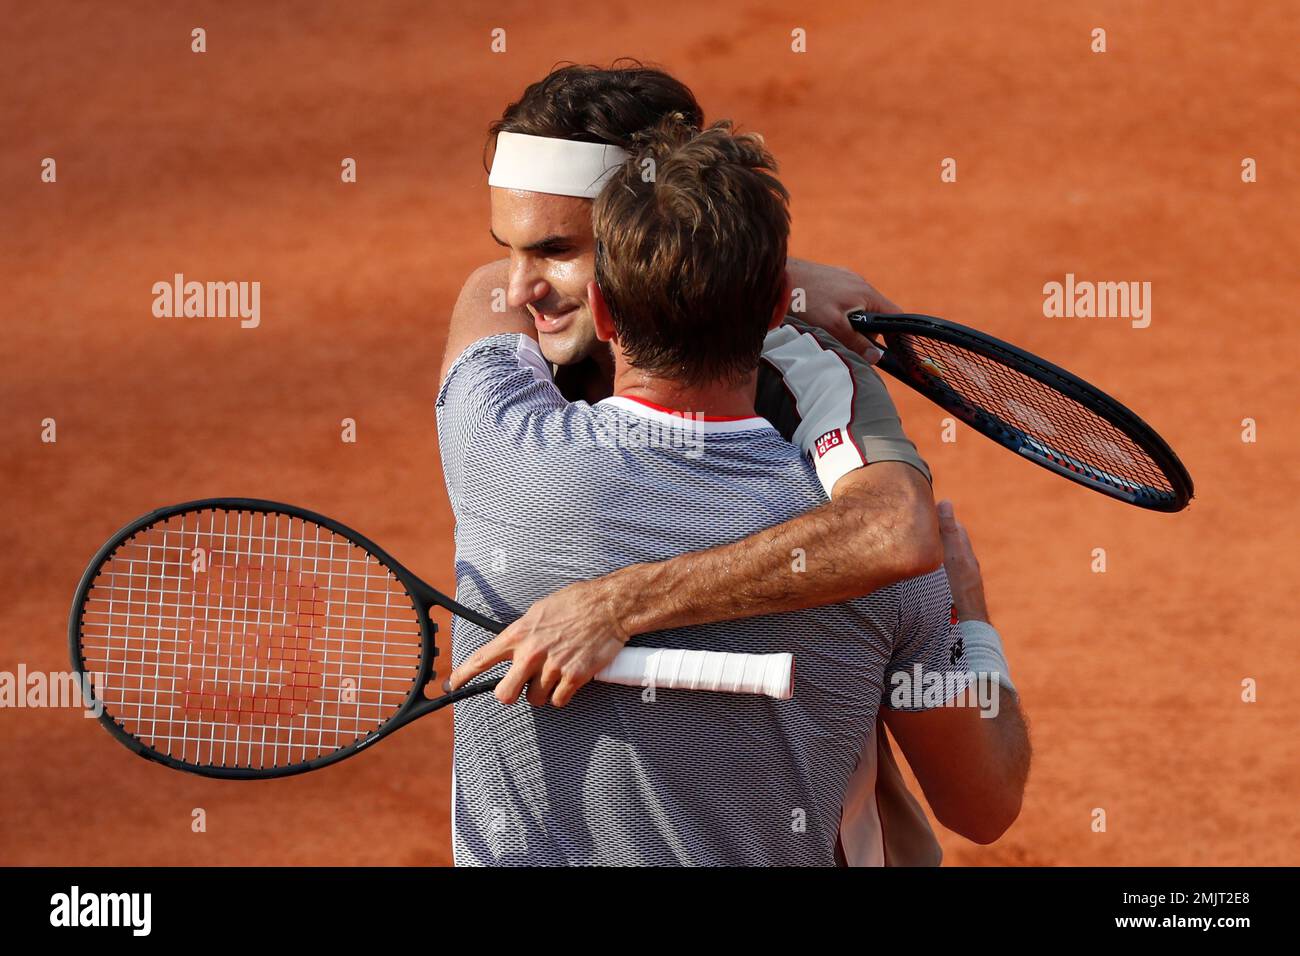 Switzerland's Roger Federer and Stan Wawrinka hug after their quarterfinal  match of the French Open tennis tournament which Federer won in four sets,  7-6 (7-4), 4-6, 7-6 (7-5), 6-4, at the Roland